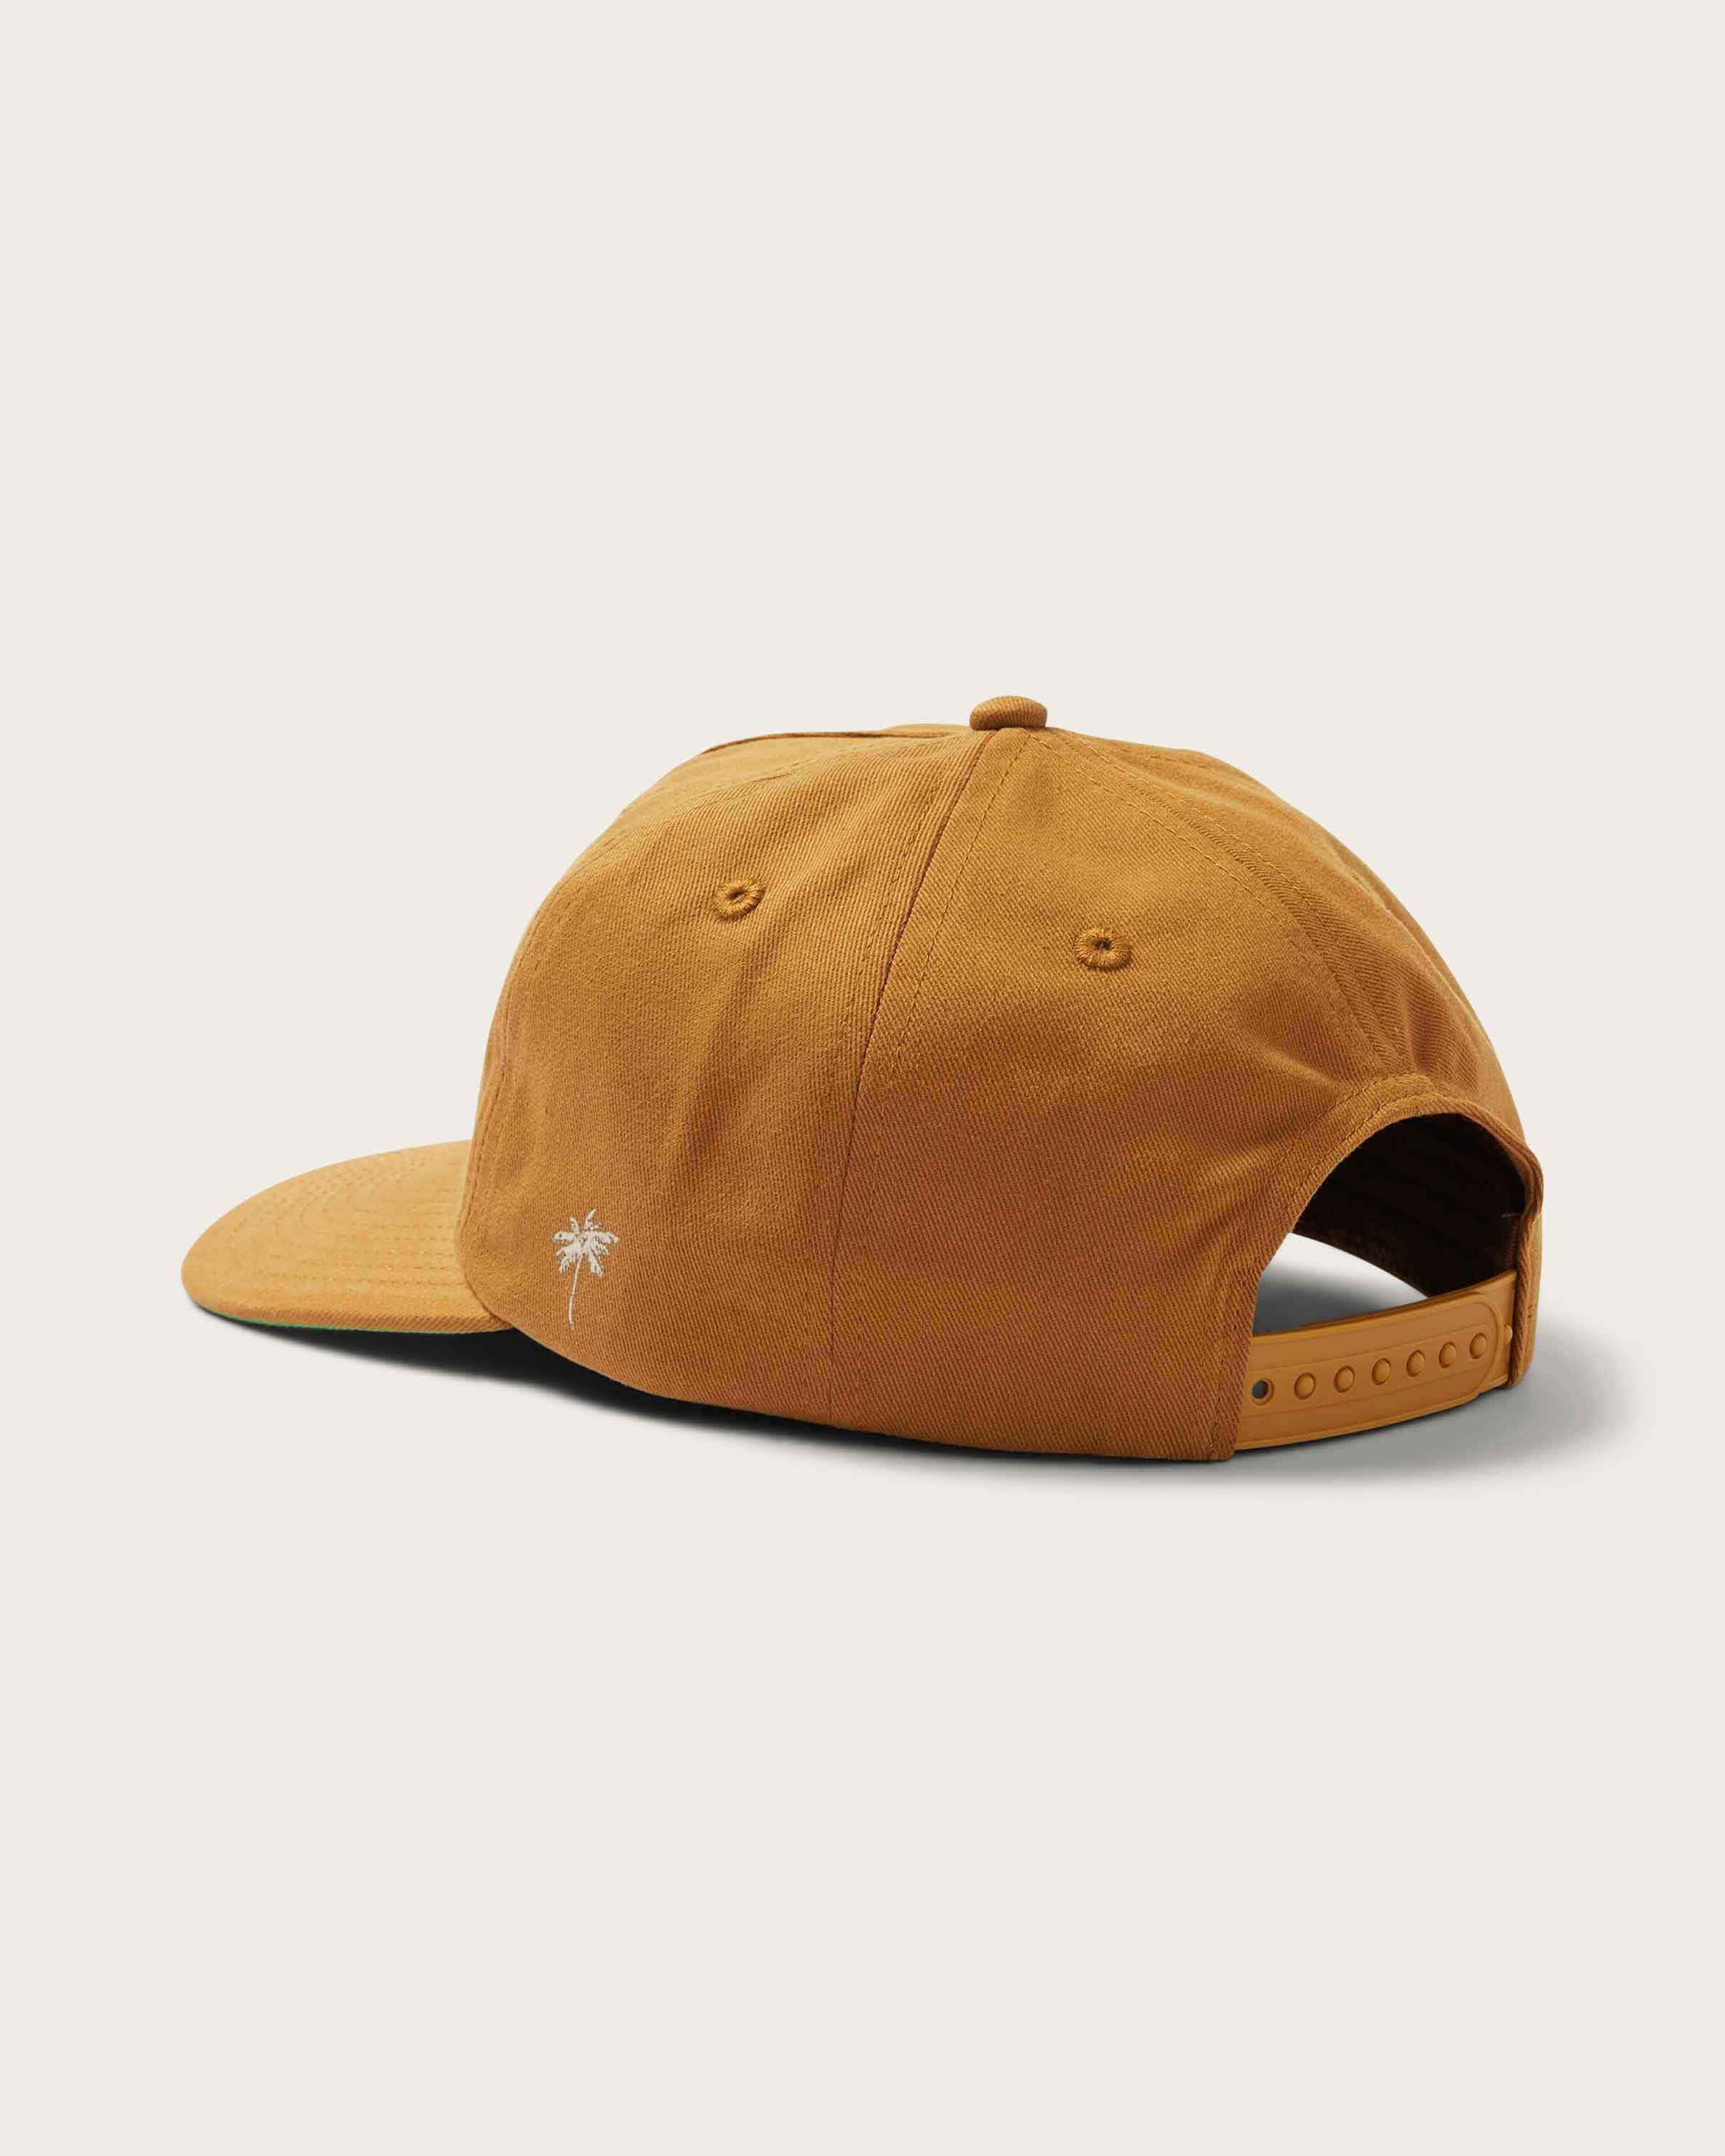 Thomas 5 Panel Hat in Ginger - undefined - Hemlock Hat Co. Ball Caps